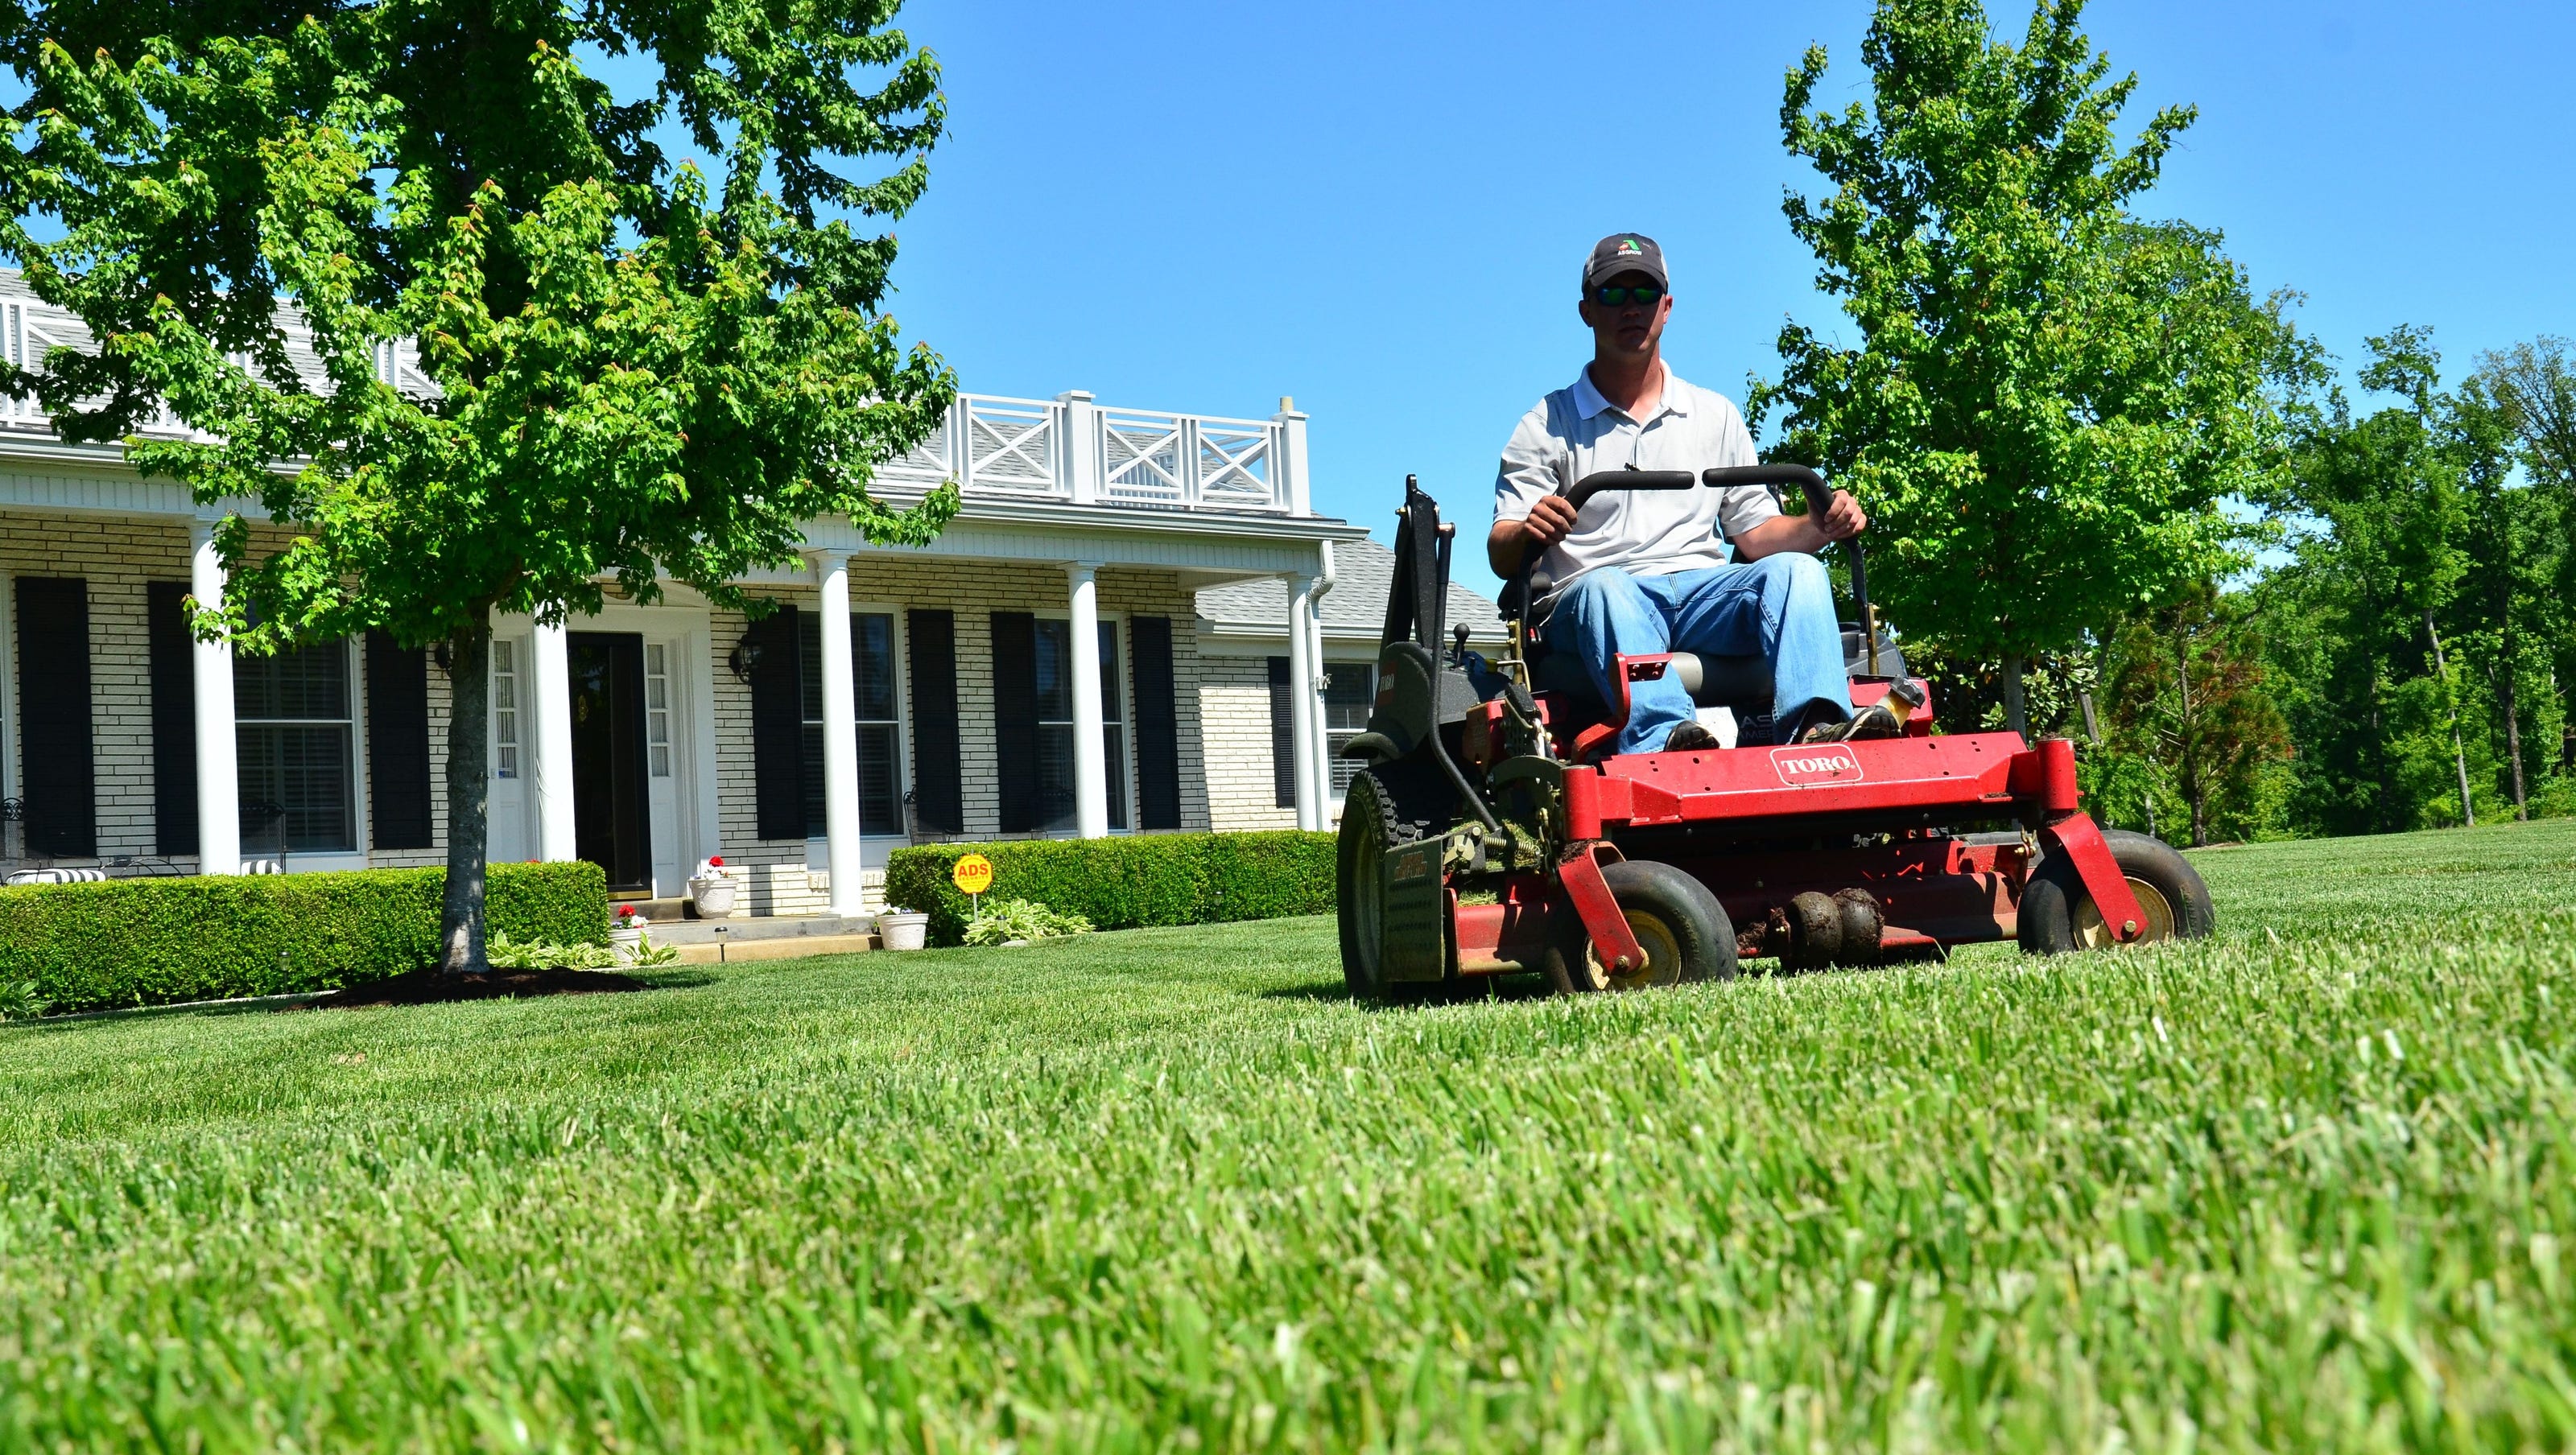 Uber For Lawn Care Service Launches in Cinco Ranch